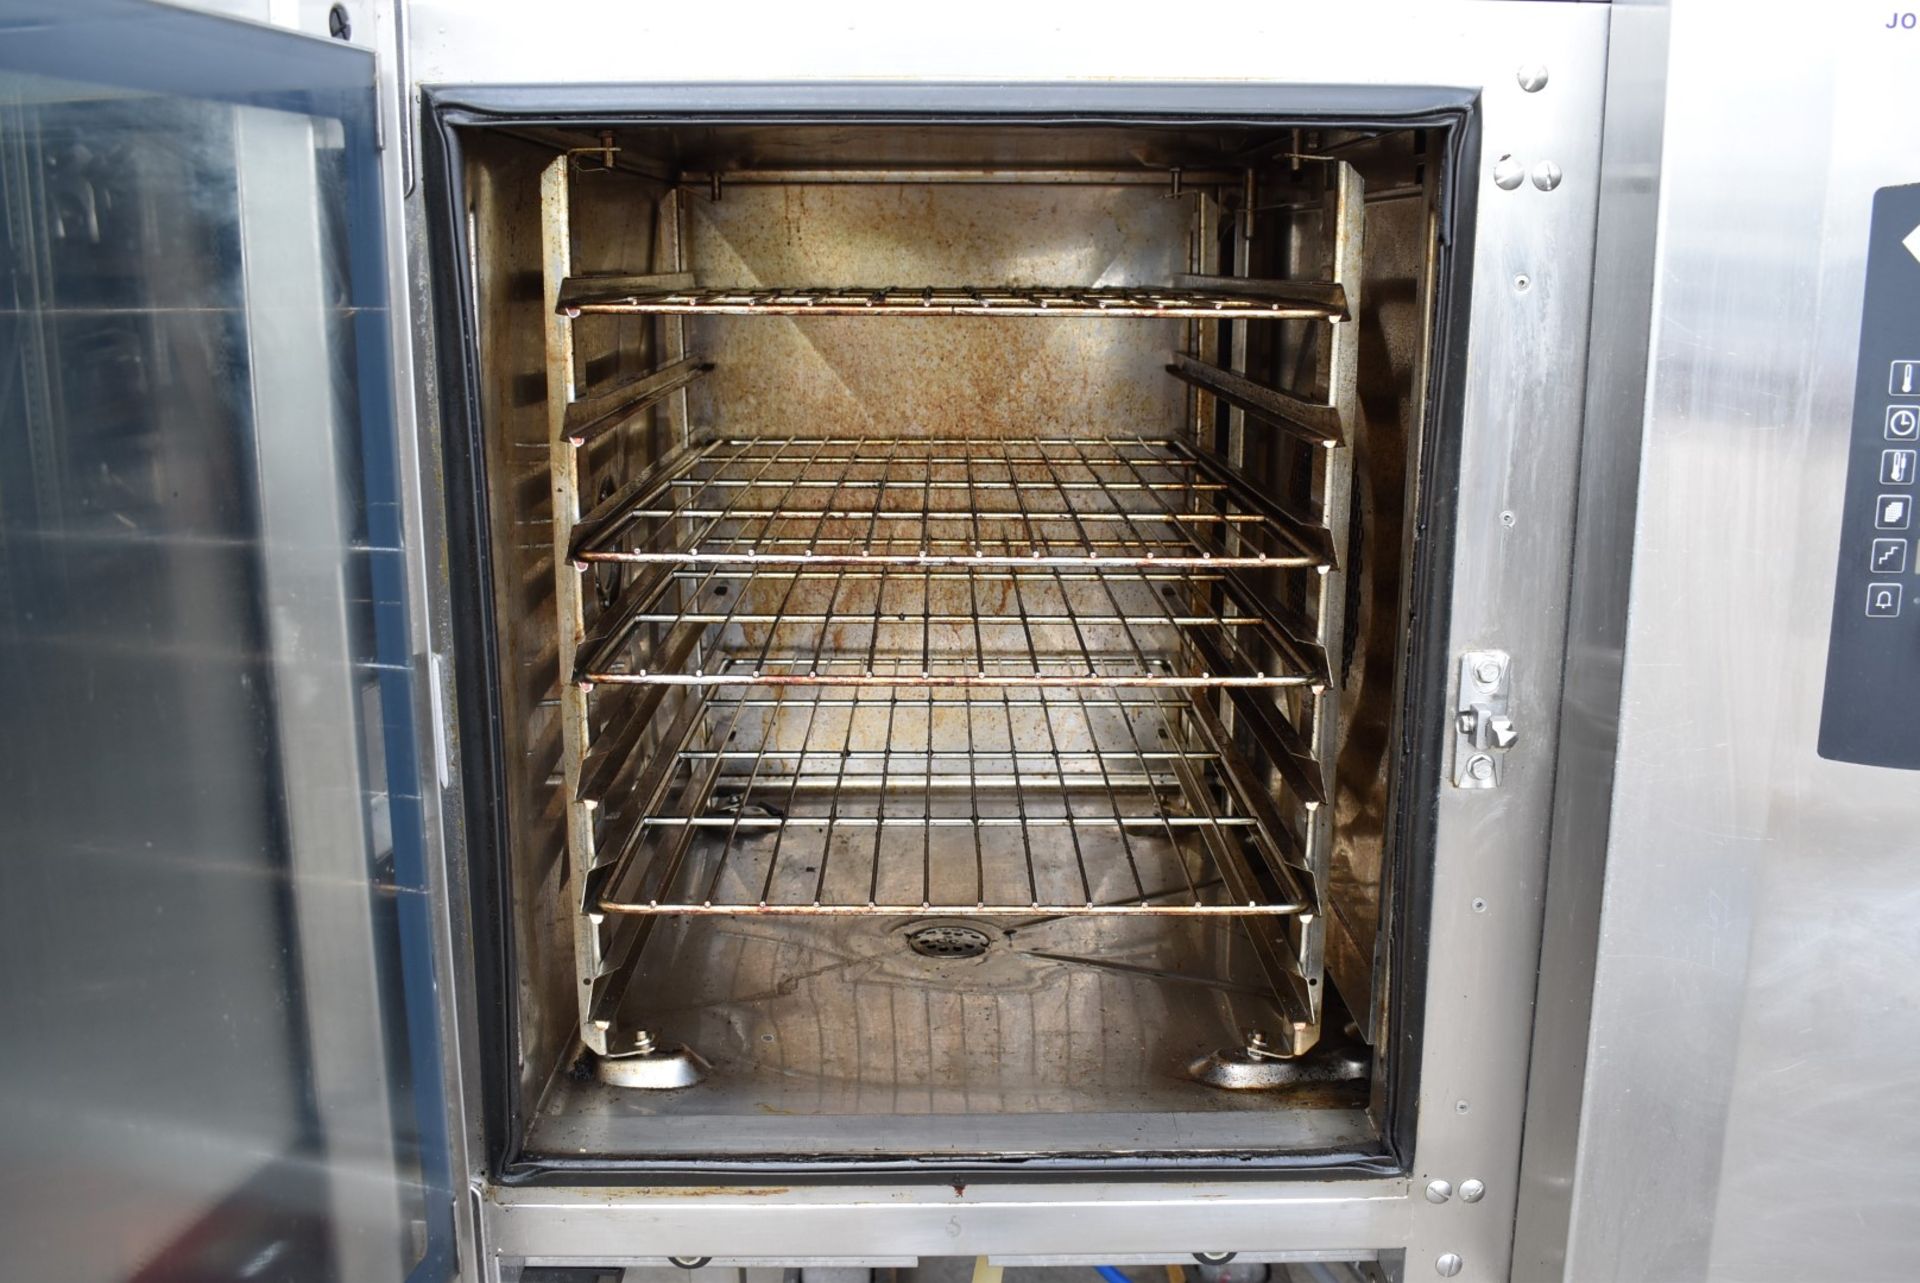 1 x Houno 6 Grid Electric Combi Oven With Stand and Extractor - 3 Phase Electric Power - Model C1.06 - Image 10 of 13